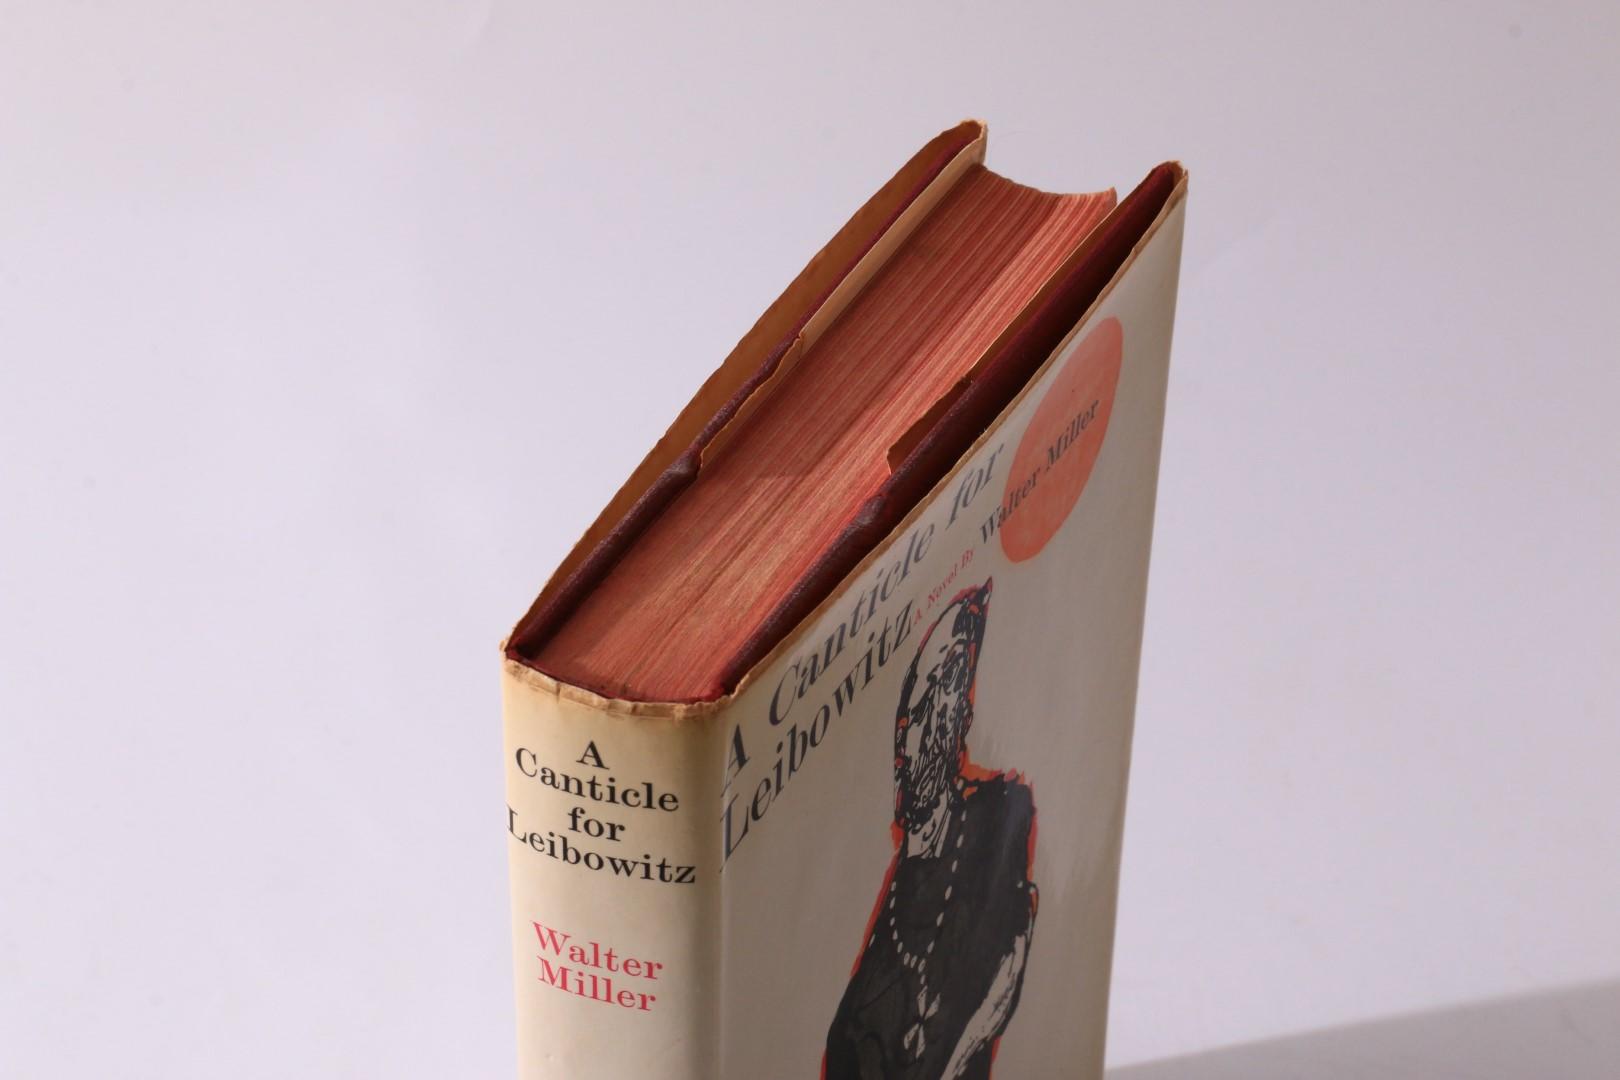 Walter Miller - A Canticle for Leibowitz - Weidenfeld & Nicolson, 1960, First Edition.